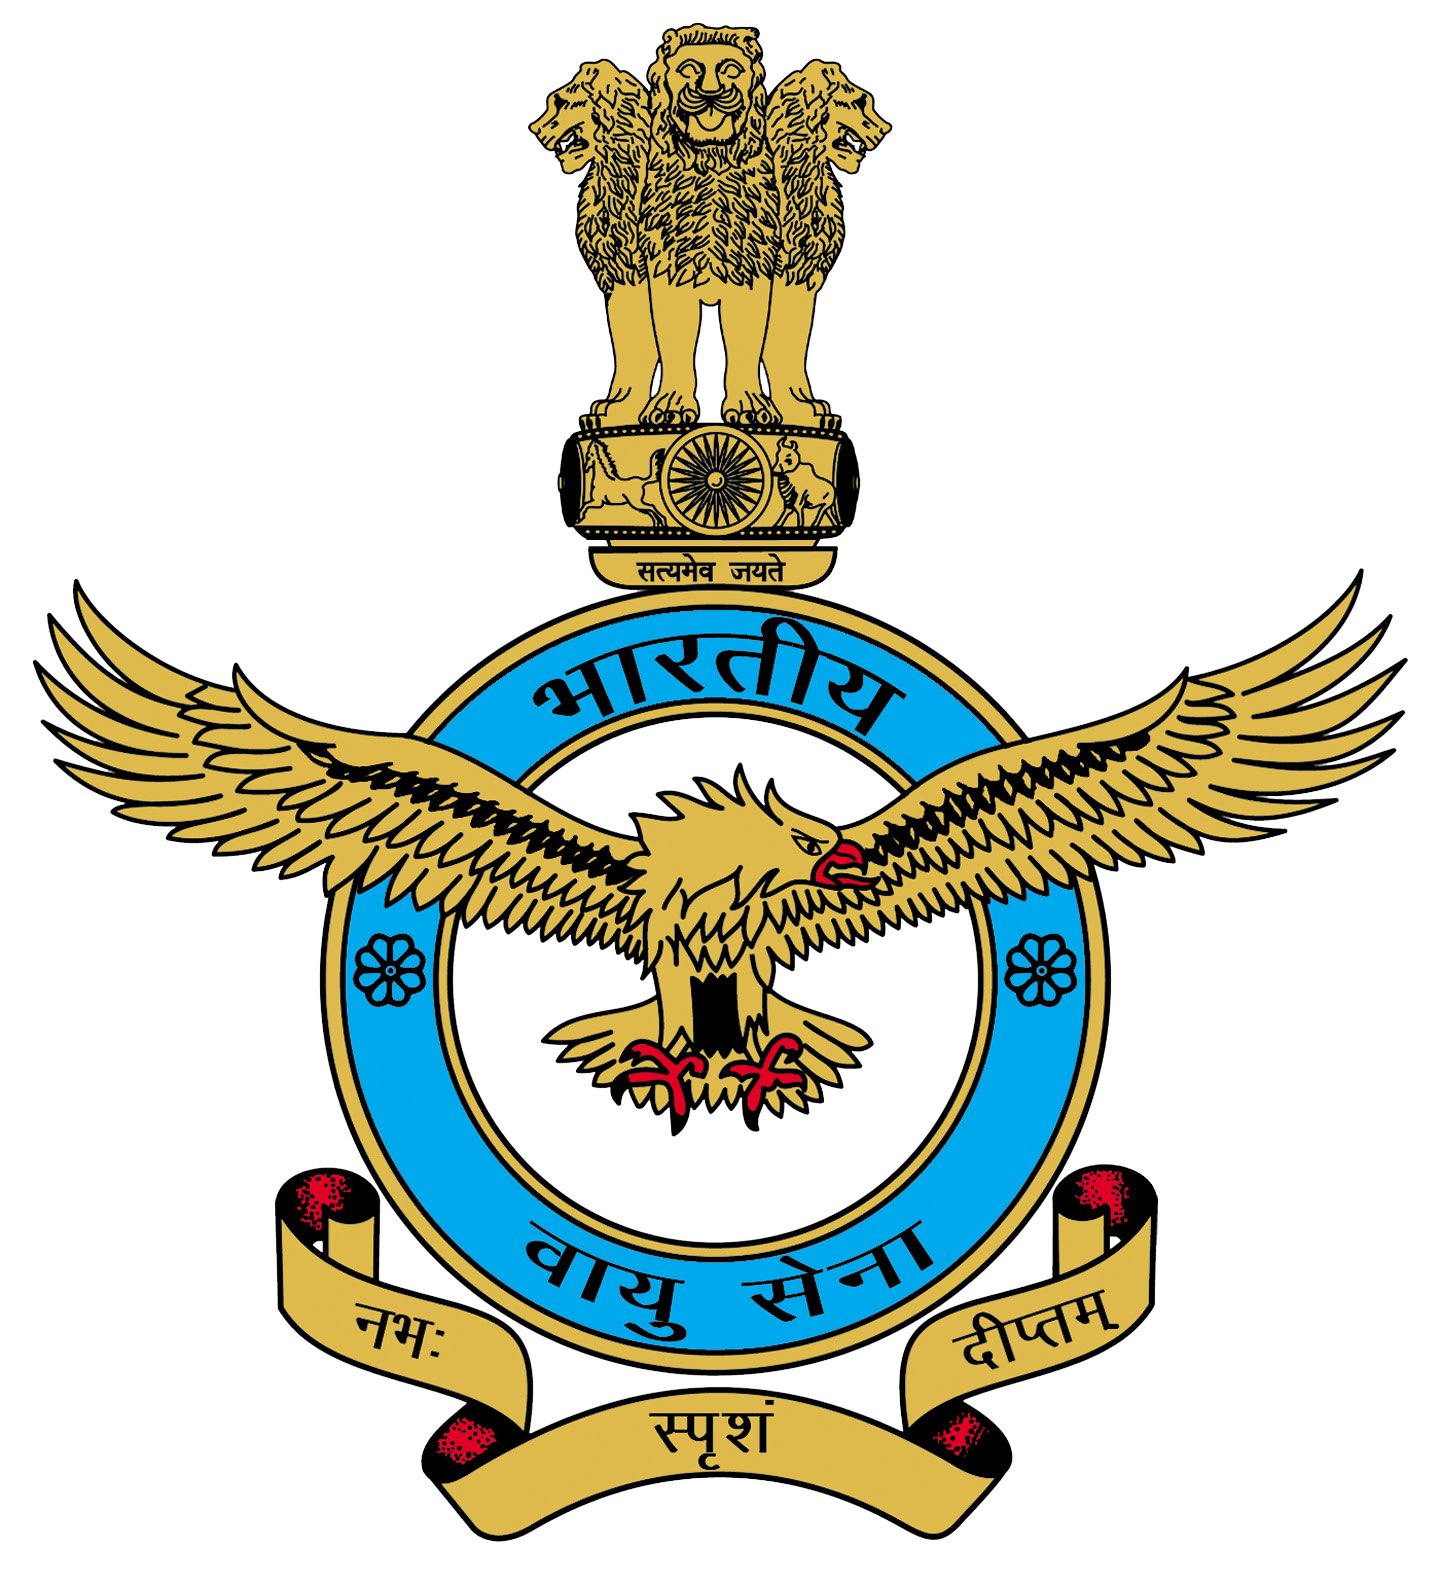 Two pilots of IAF killed in Mig-21 aircraft accident near Barmer